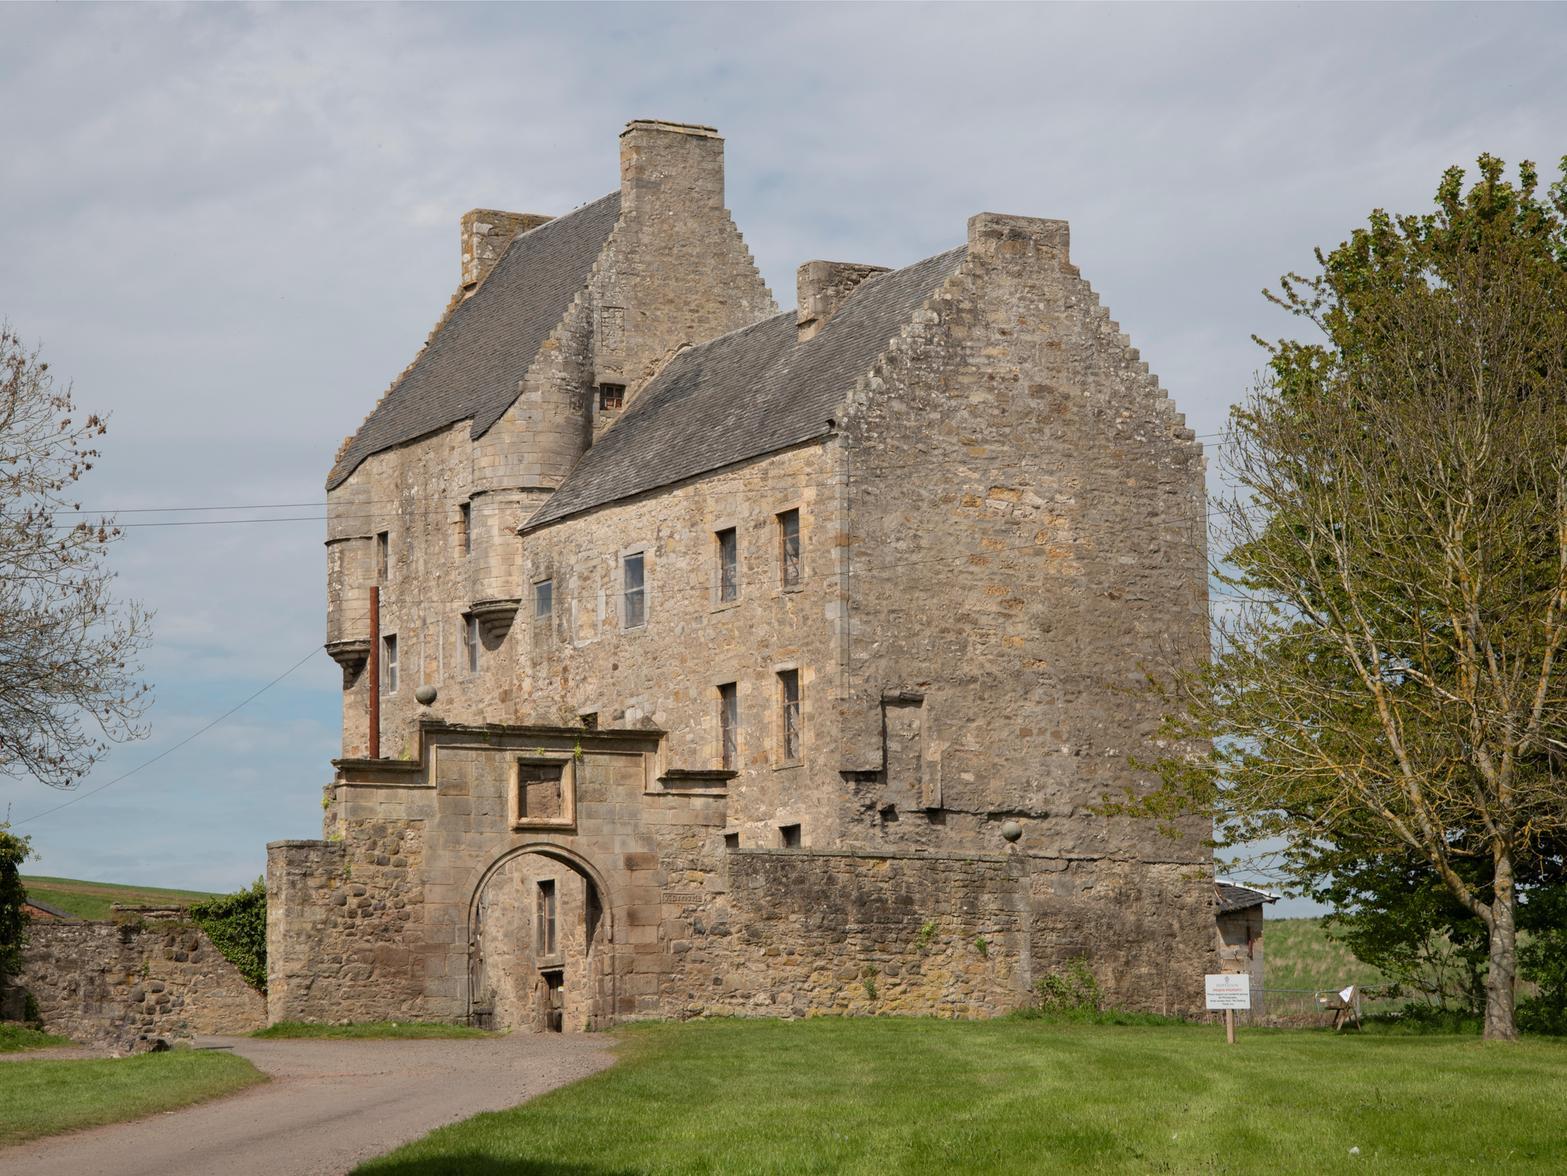 Midhope Castle is the external location of the Fraser family home, which is known as Lallybroch.